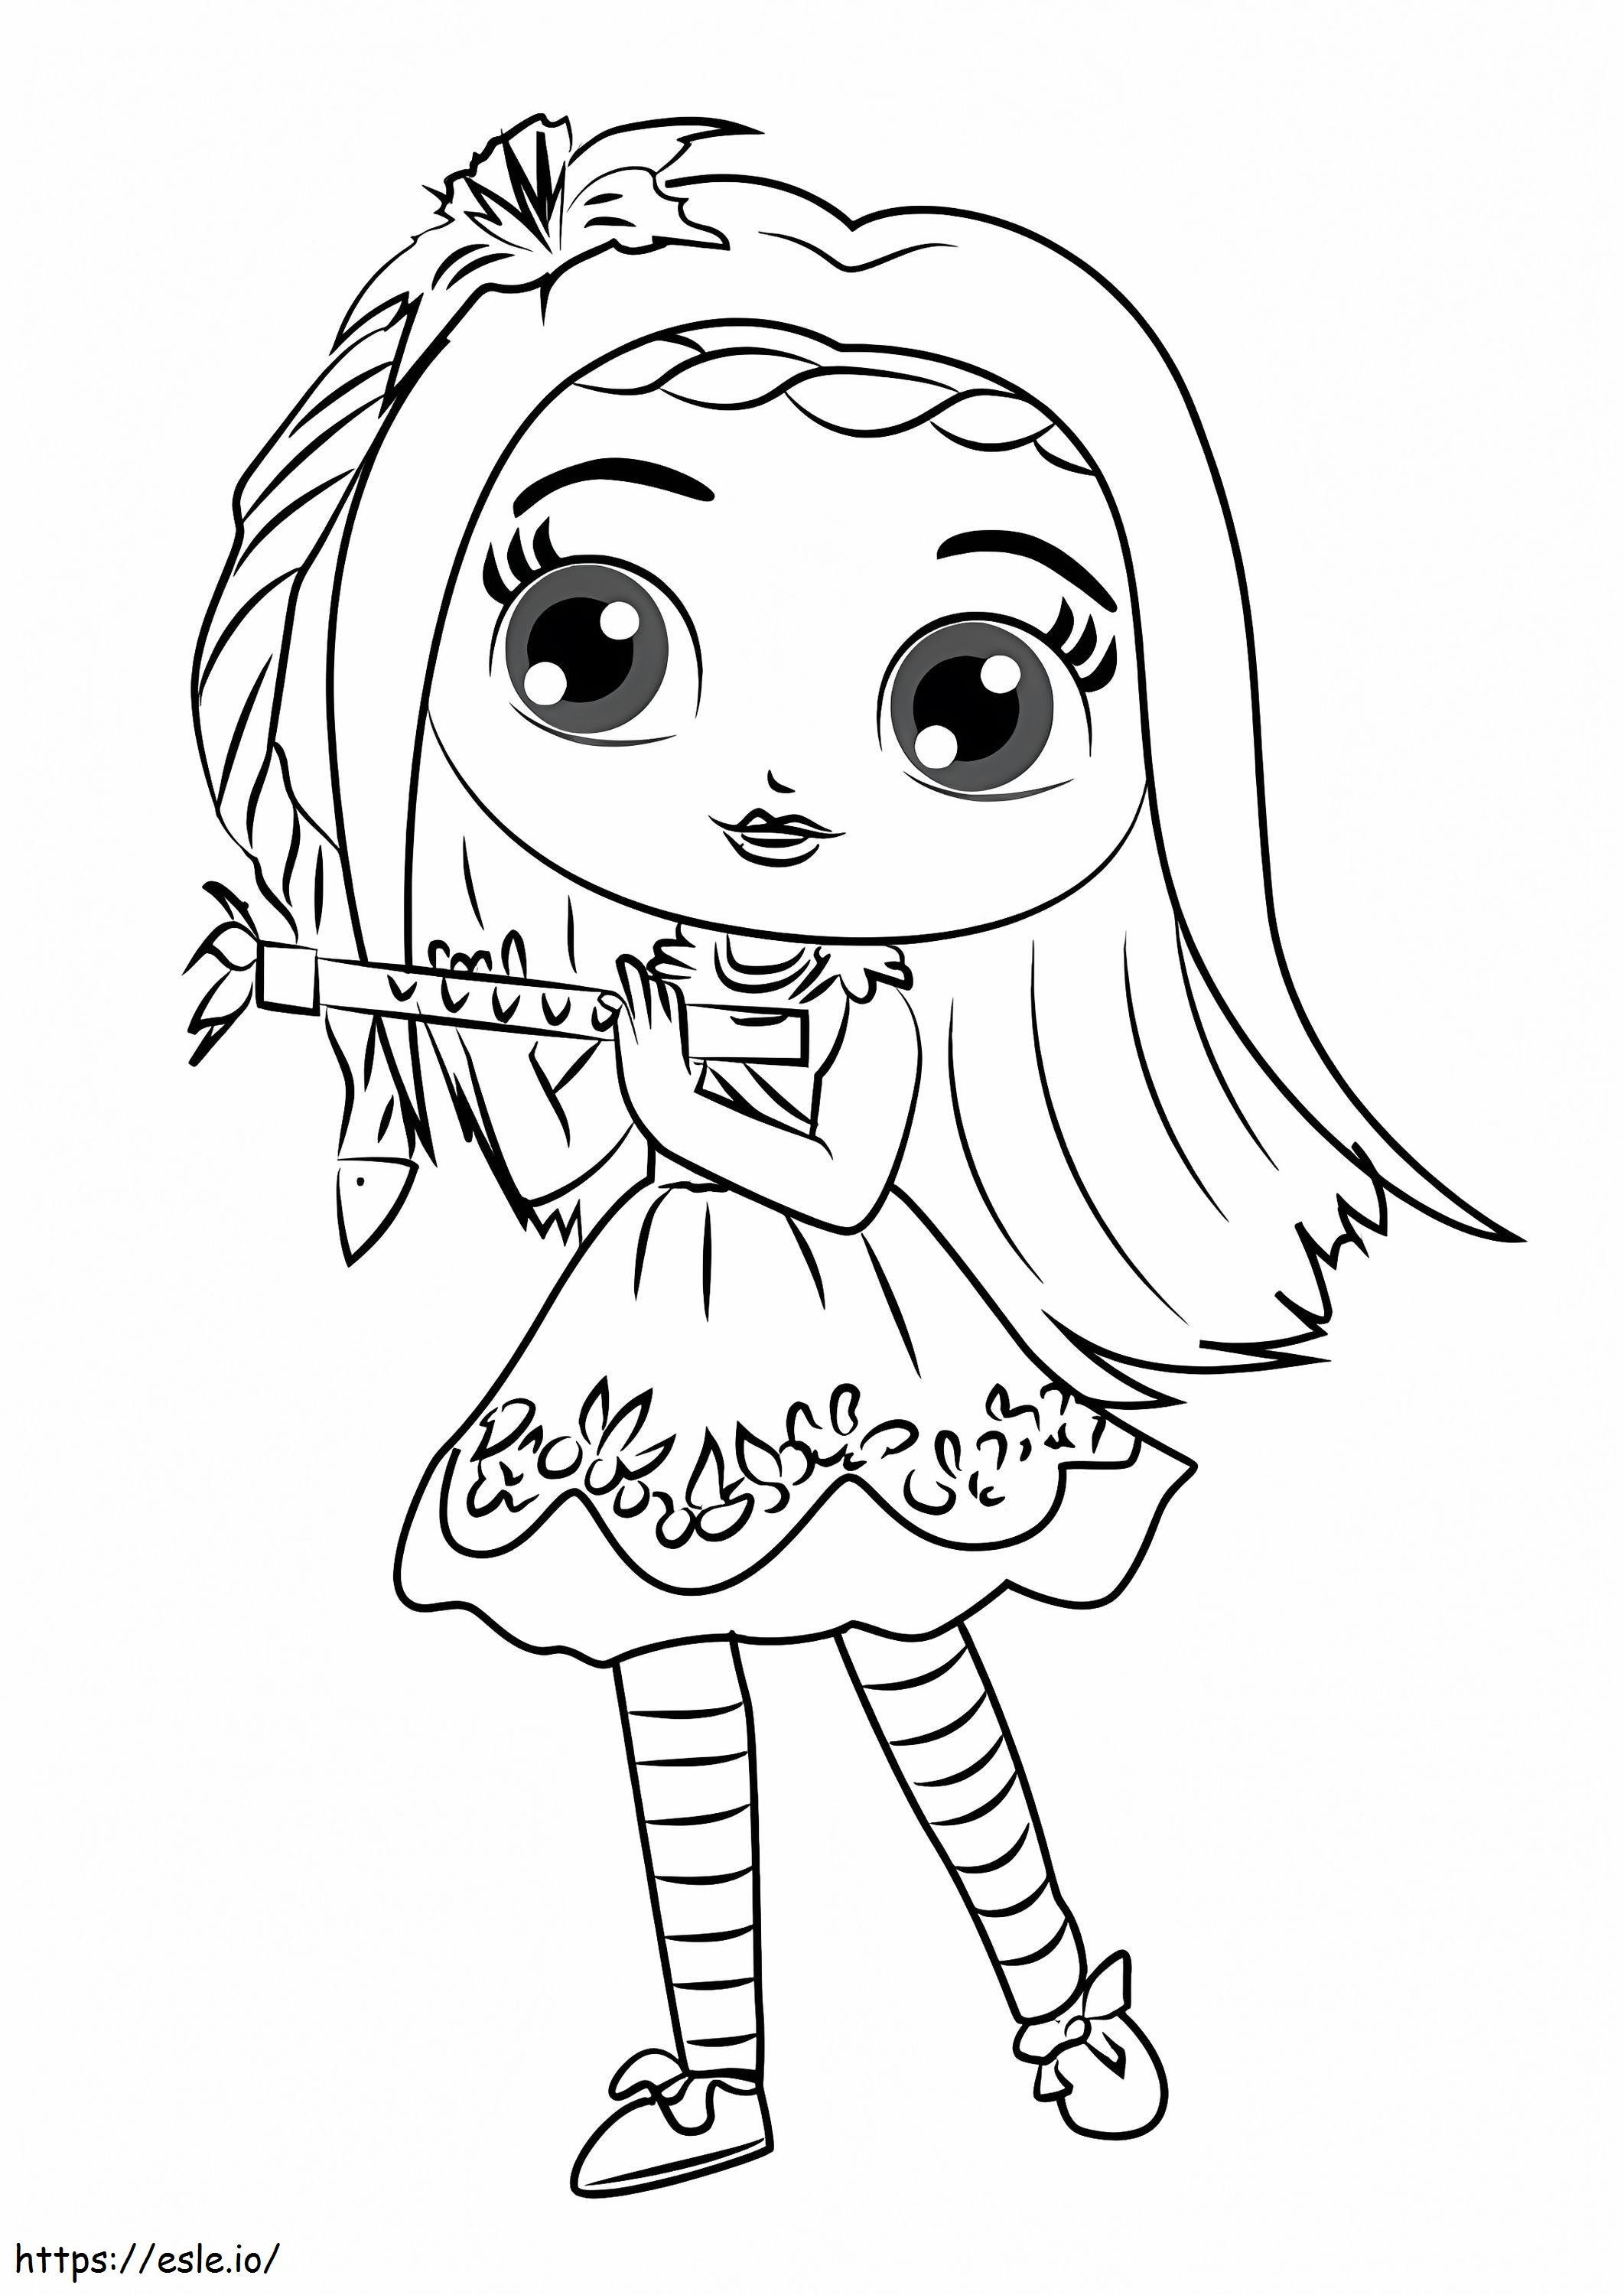 Posie Little Charmers coloring page